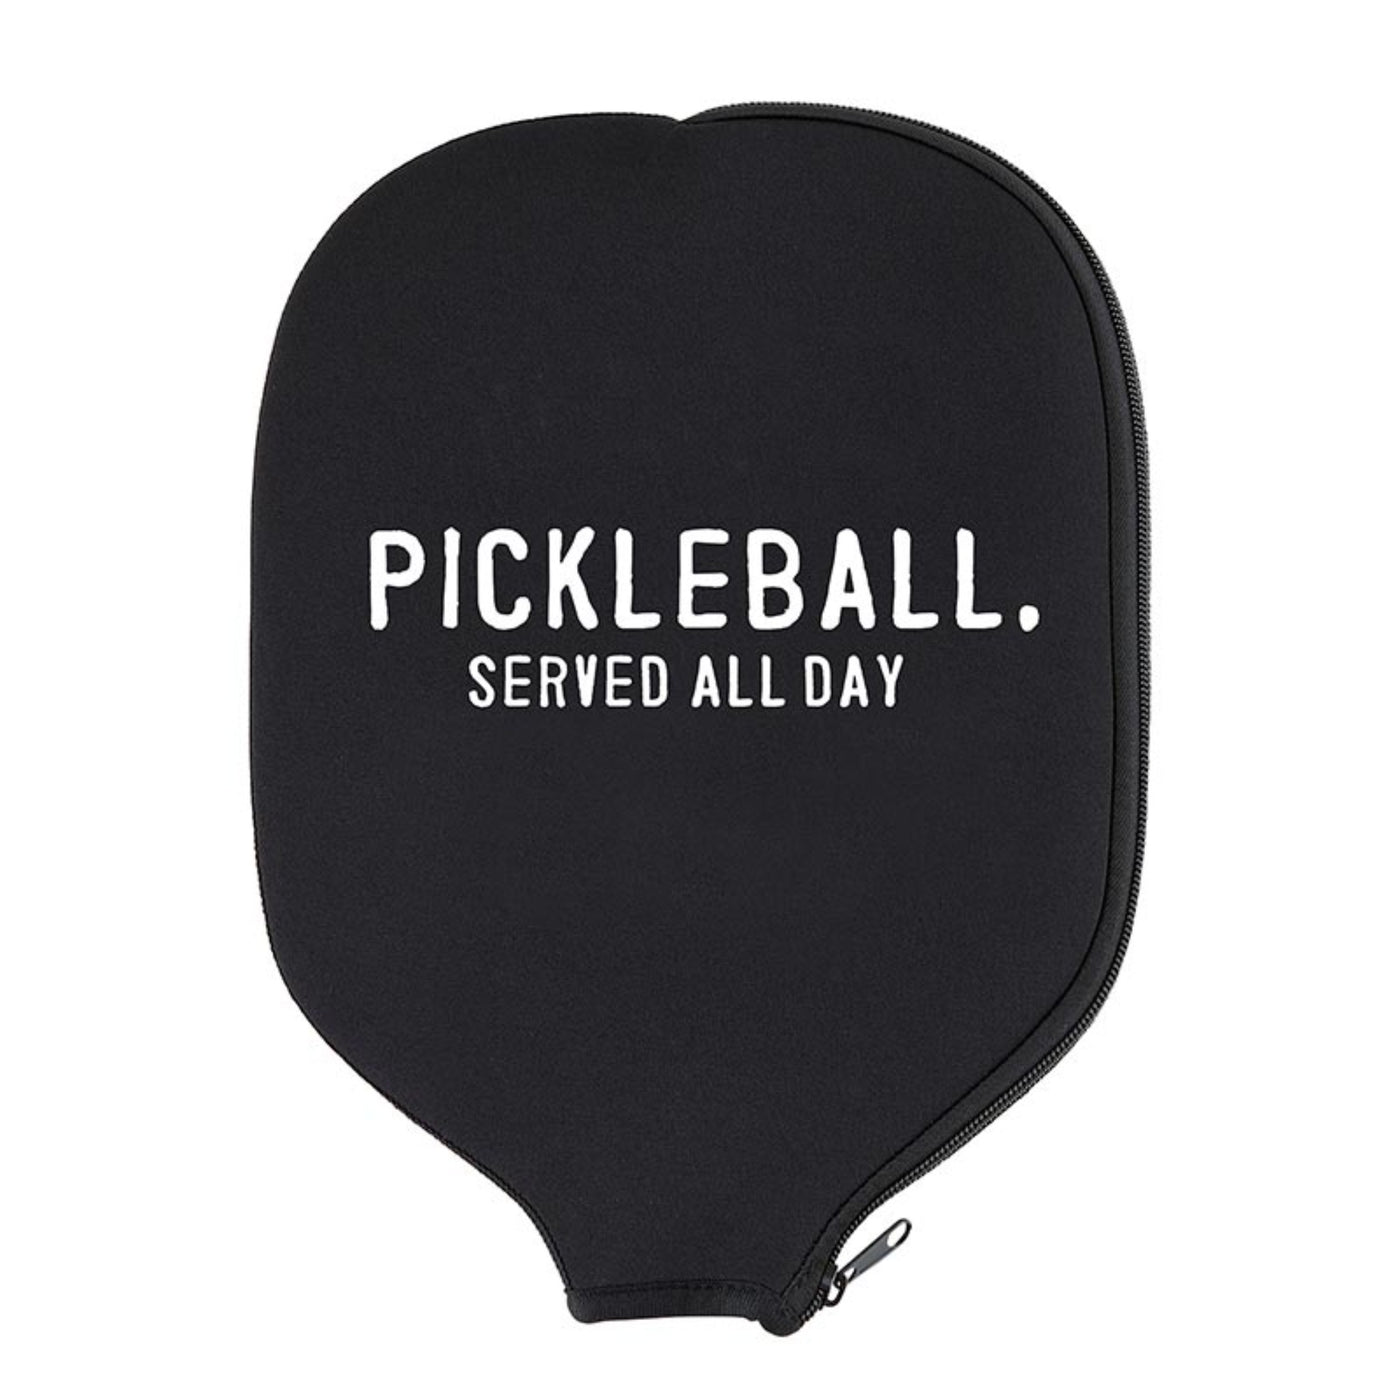 Pickleball Served All Day Paddle Cover